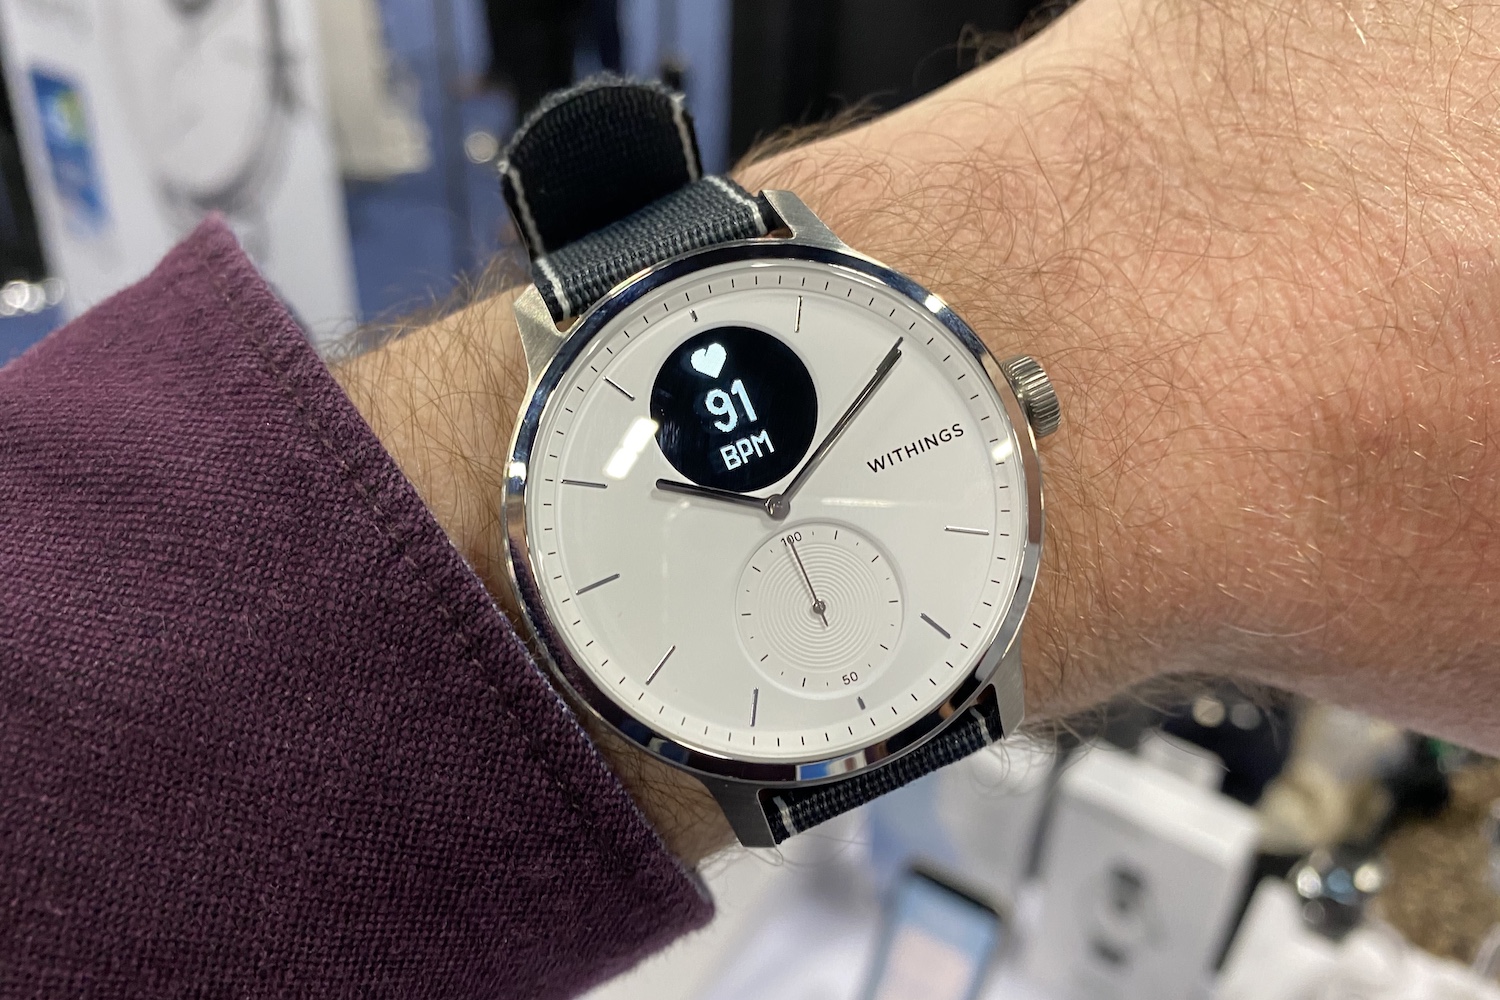 CES 2020: Our Favorite Health Gadgets - Healthcare Weekly